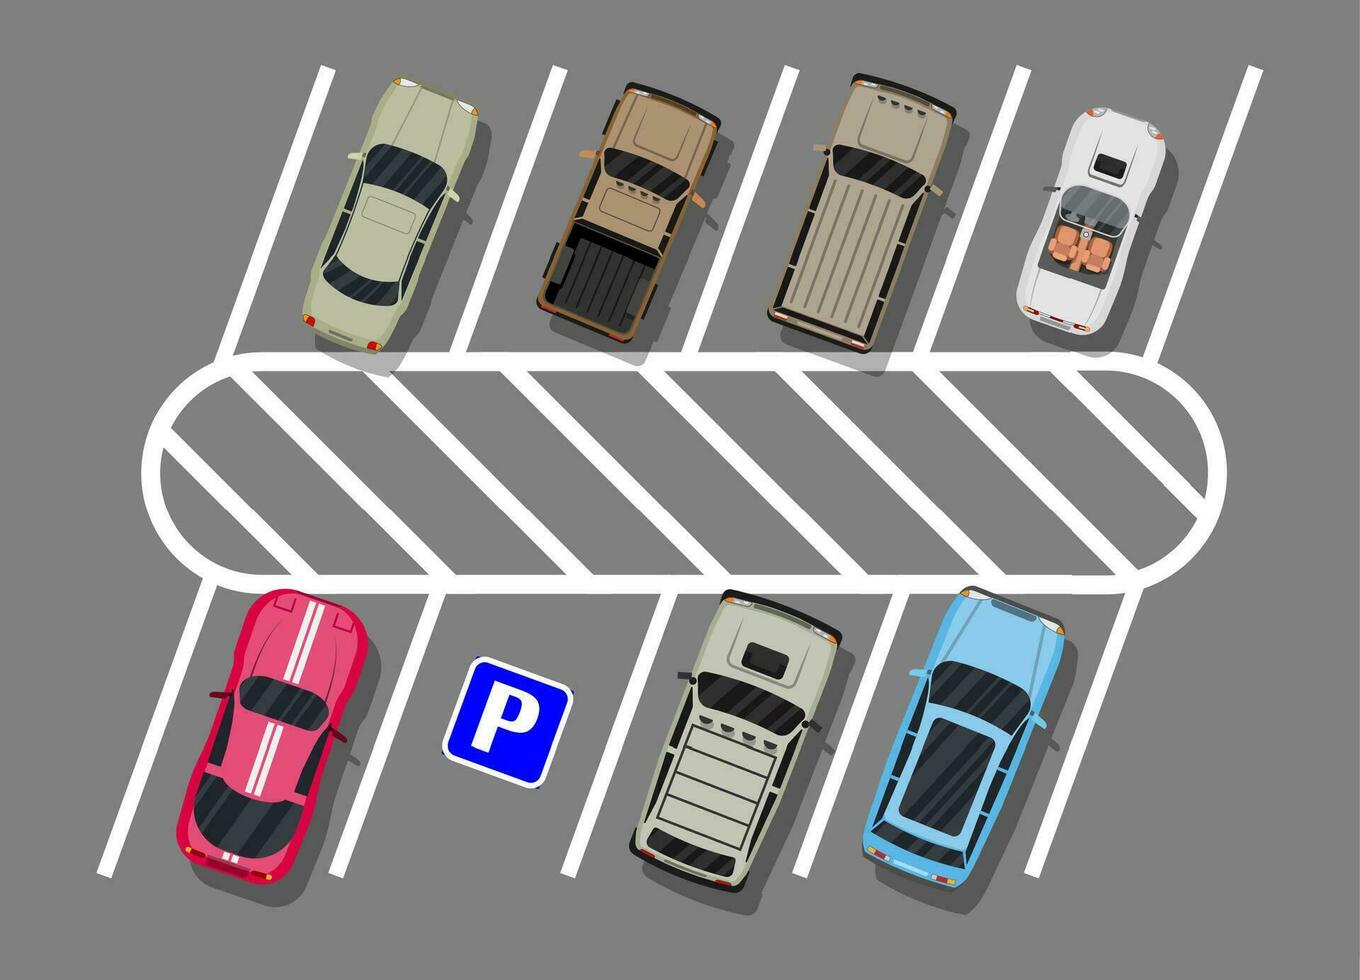 City parking lot with different cars. Shortage parking spaces. Parking zone top view with various vehicles. Sedan, roadster, suv, sport car, pickup. Vector illustration in flat style